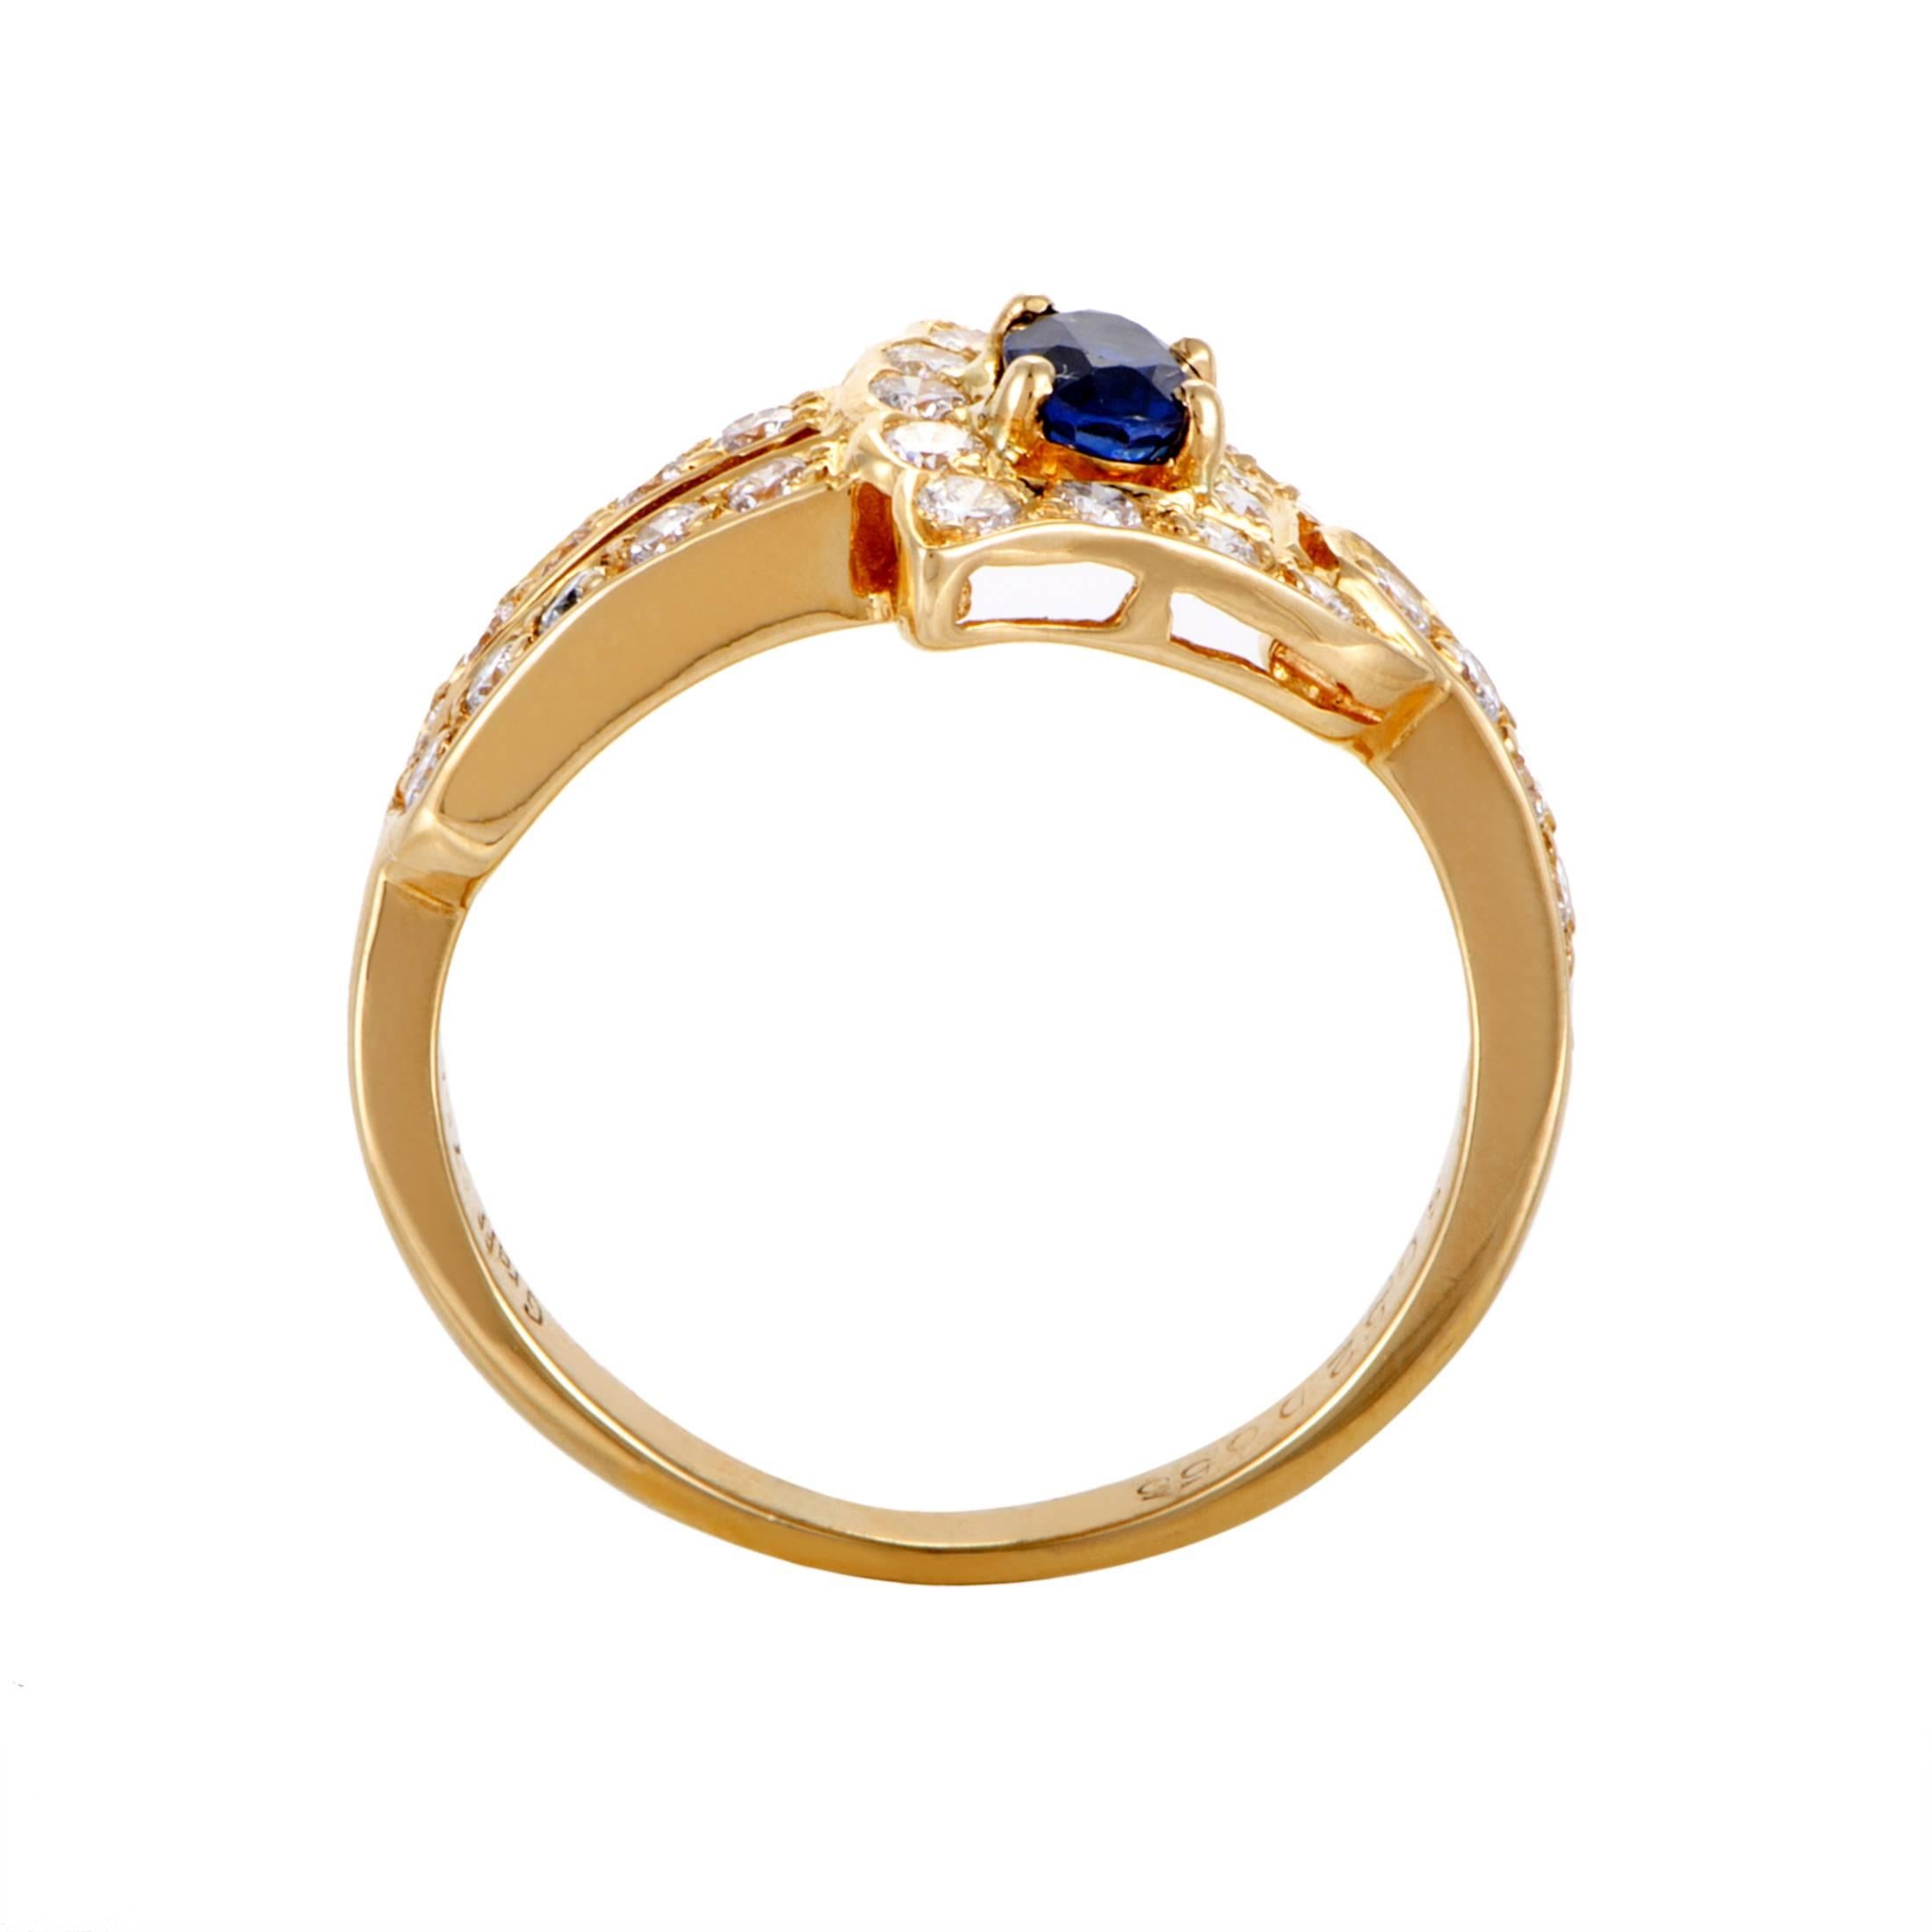 Boasting an intriguing shape embellished lavishly with glistening diamonds amounting to 0.56ct, this fabulous 18K yellow gold ring from Graff is adorned with a splendid sapphire weighing 0.52ct to produce a tasteful and colorful appeal.

Ring Size: